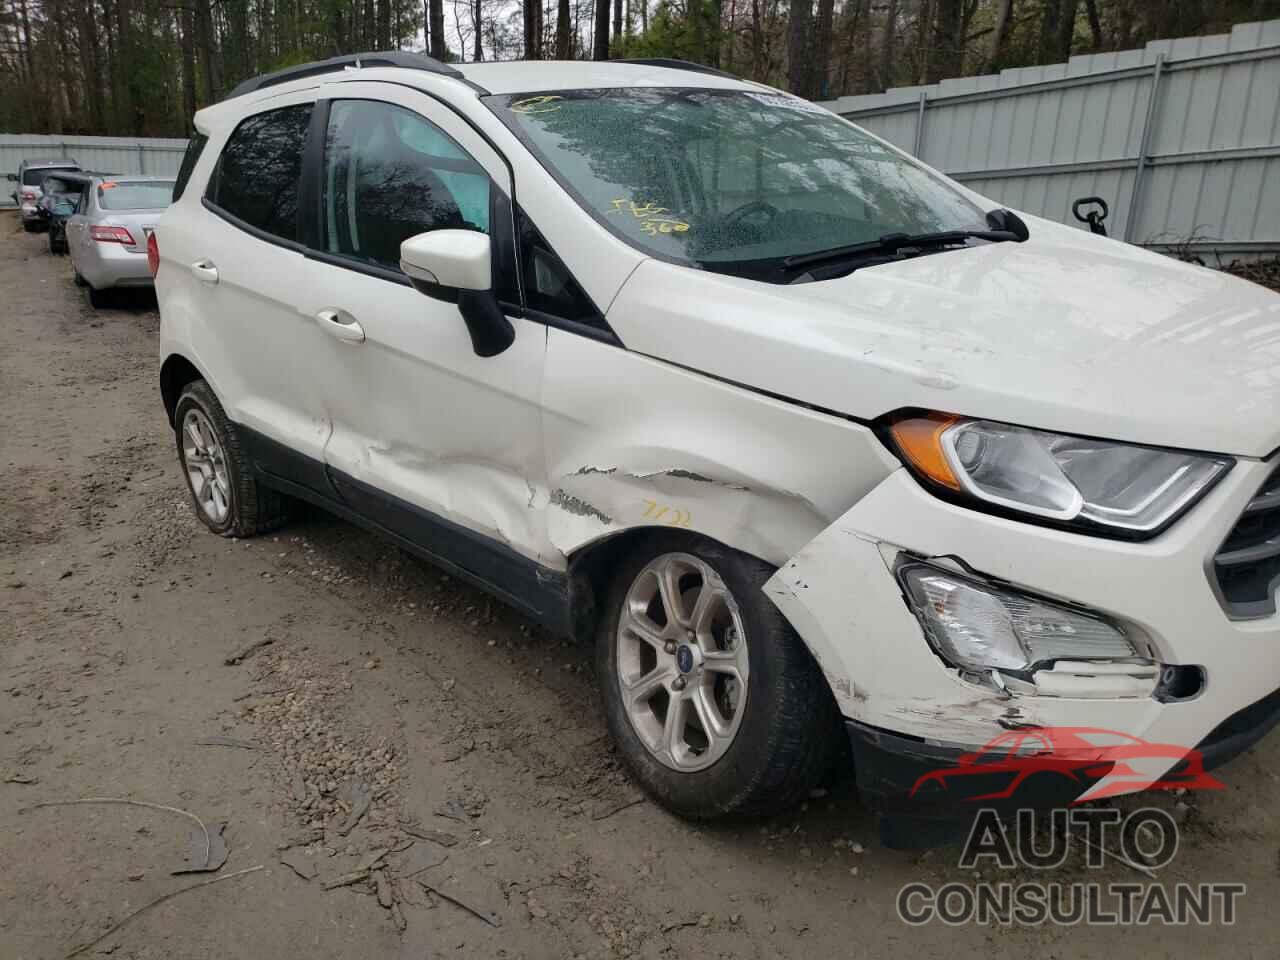 FORD ALL OTHER 2018 - MAJ3P1TE2JC236287